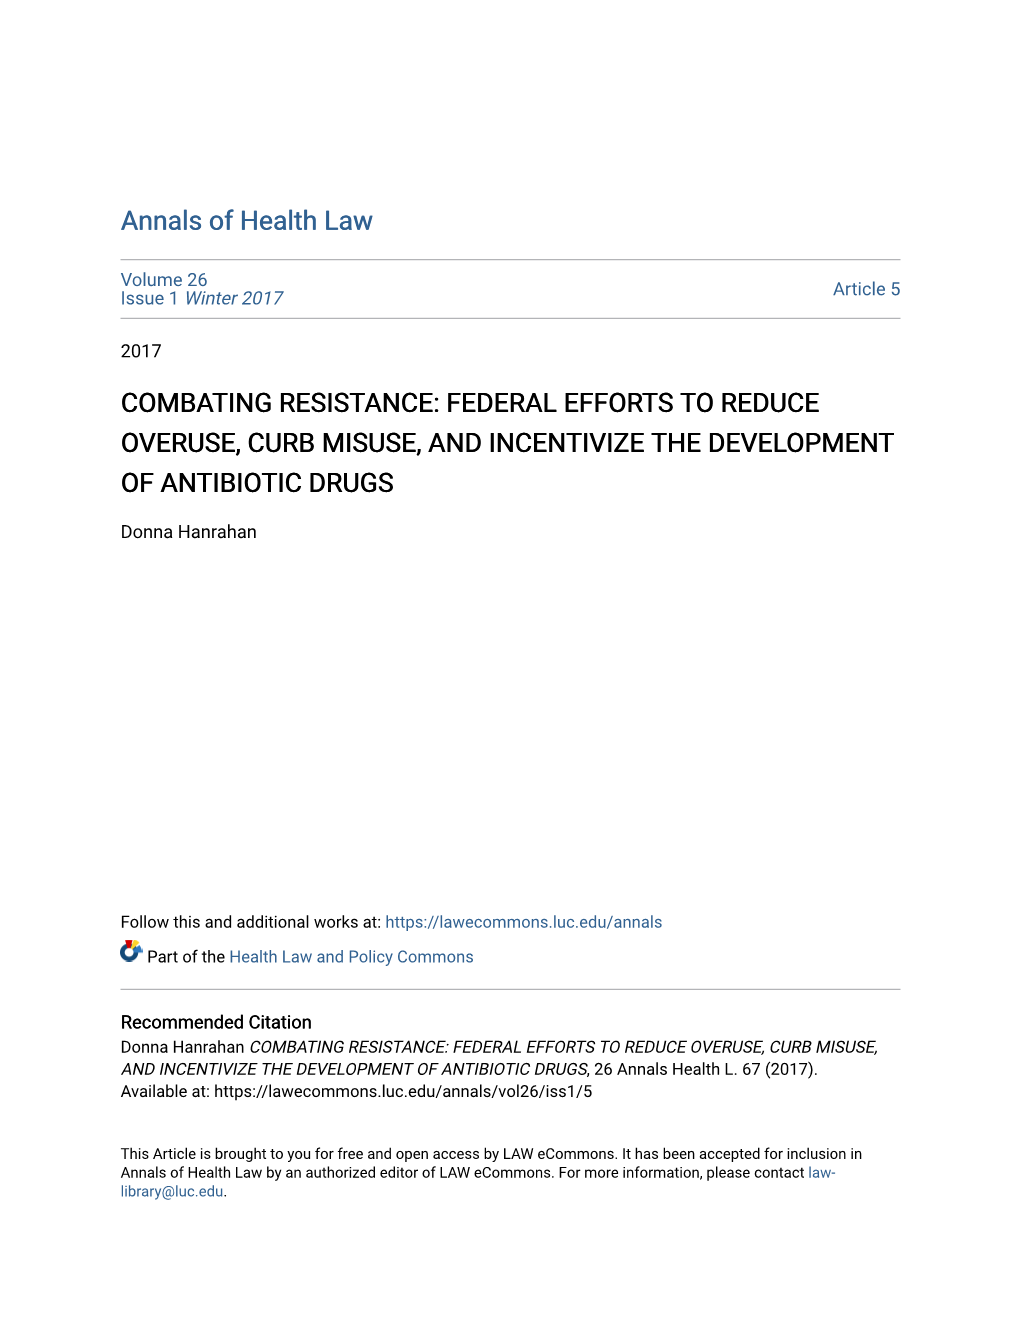 Combating Resistance: Federal Efforts to Reduce Overuse, Curb Misuse, and Incentivize the Development of Antibiotic Drugs